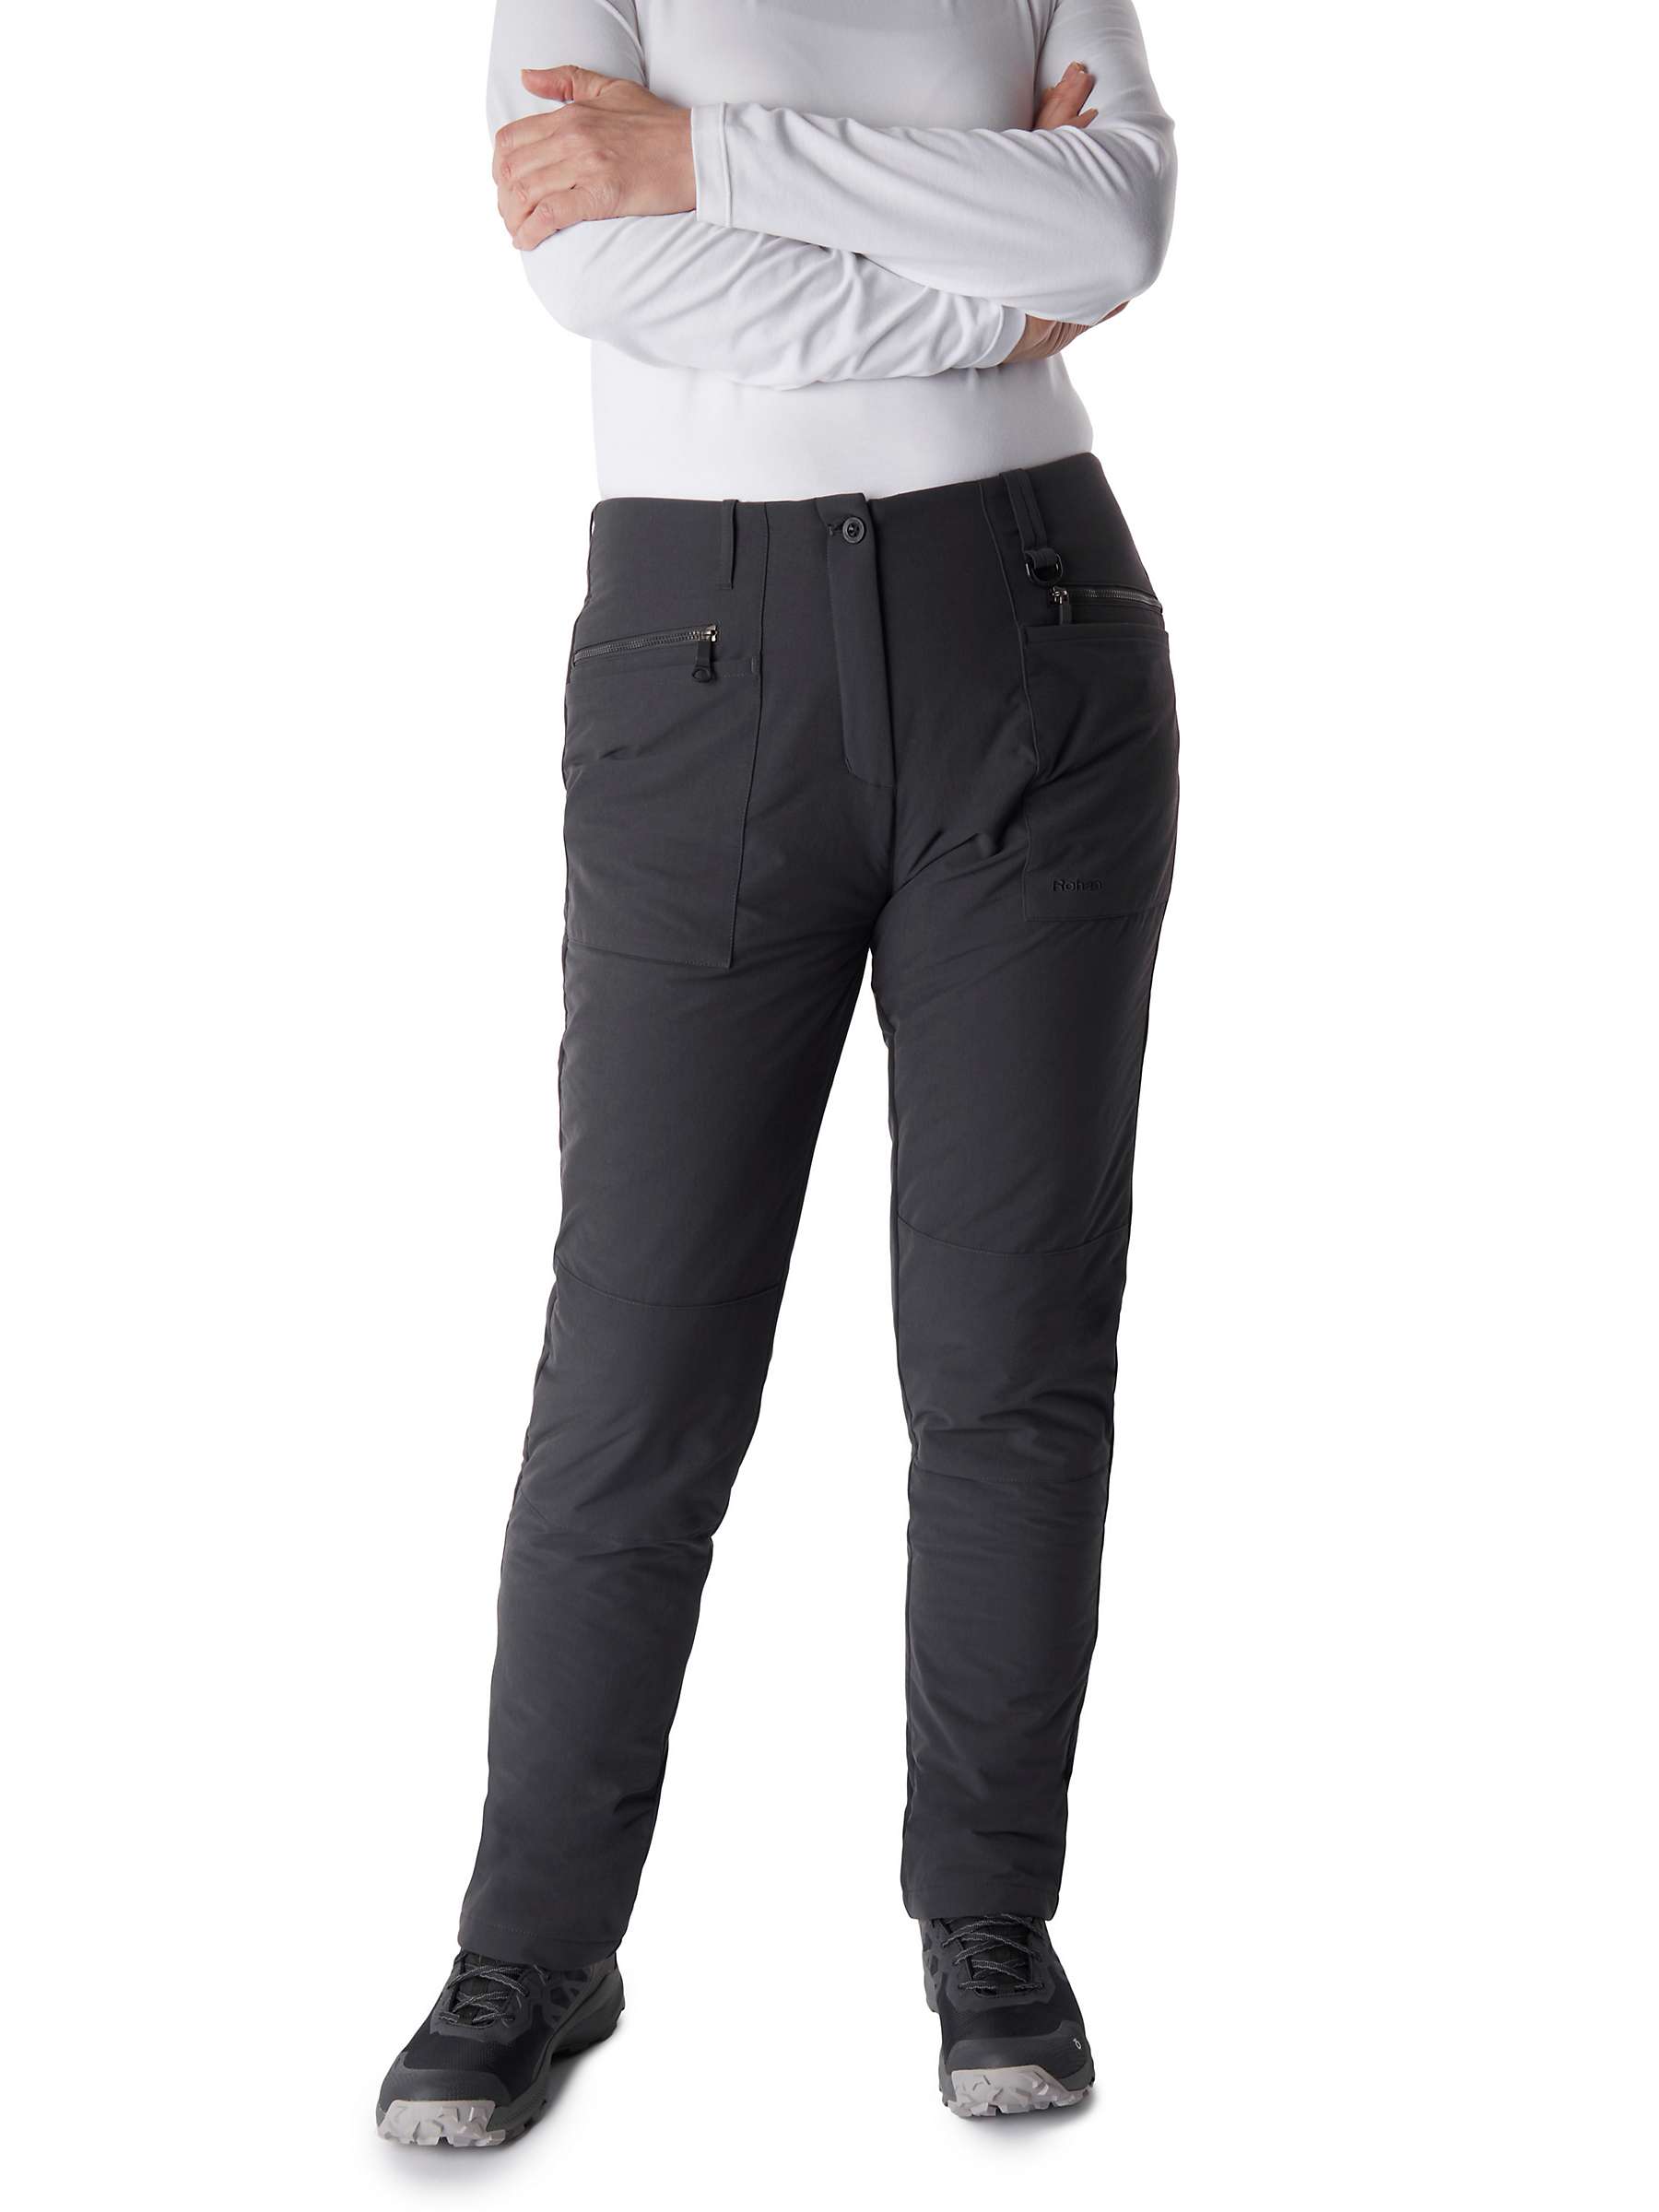 Buy Rohan Winter Stretch Bags Walking Trousers, Carbon Online at johnlewis.com